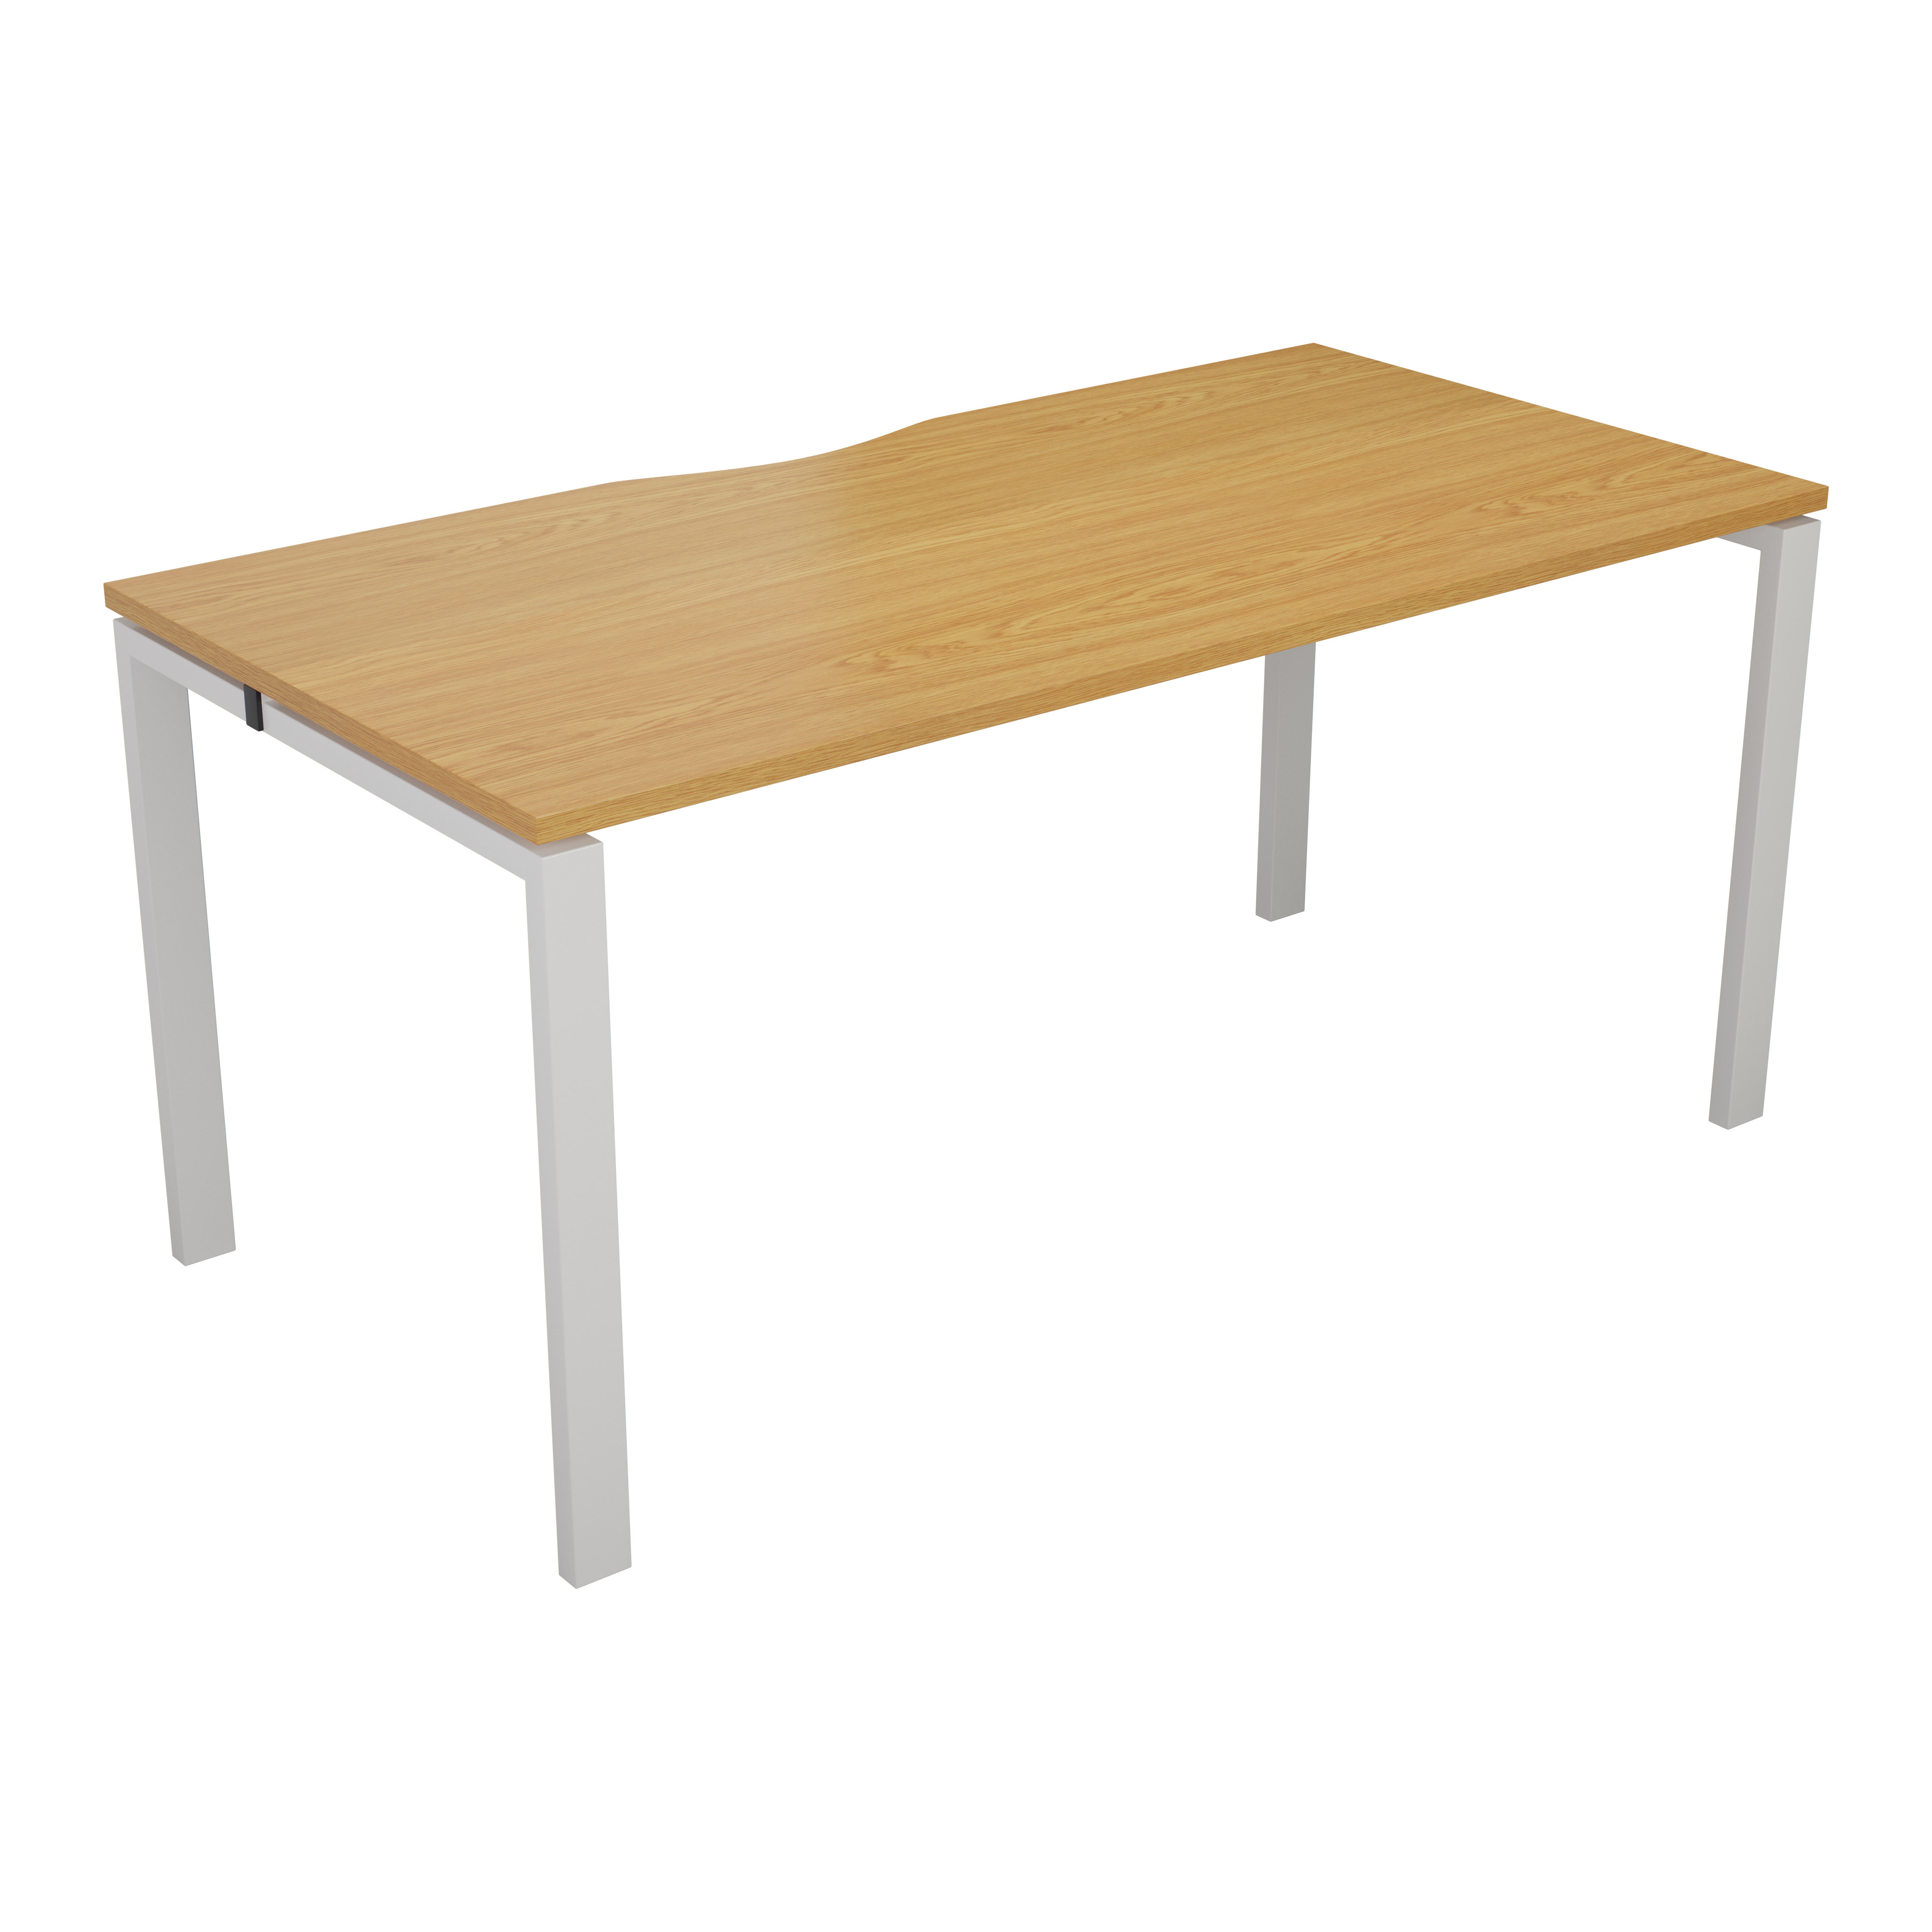 CB 1 Person Bench 1200 x 800 - Oak Top and White Legs